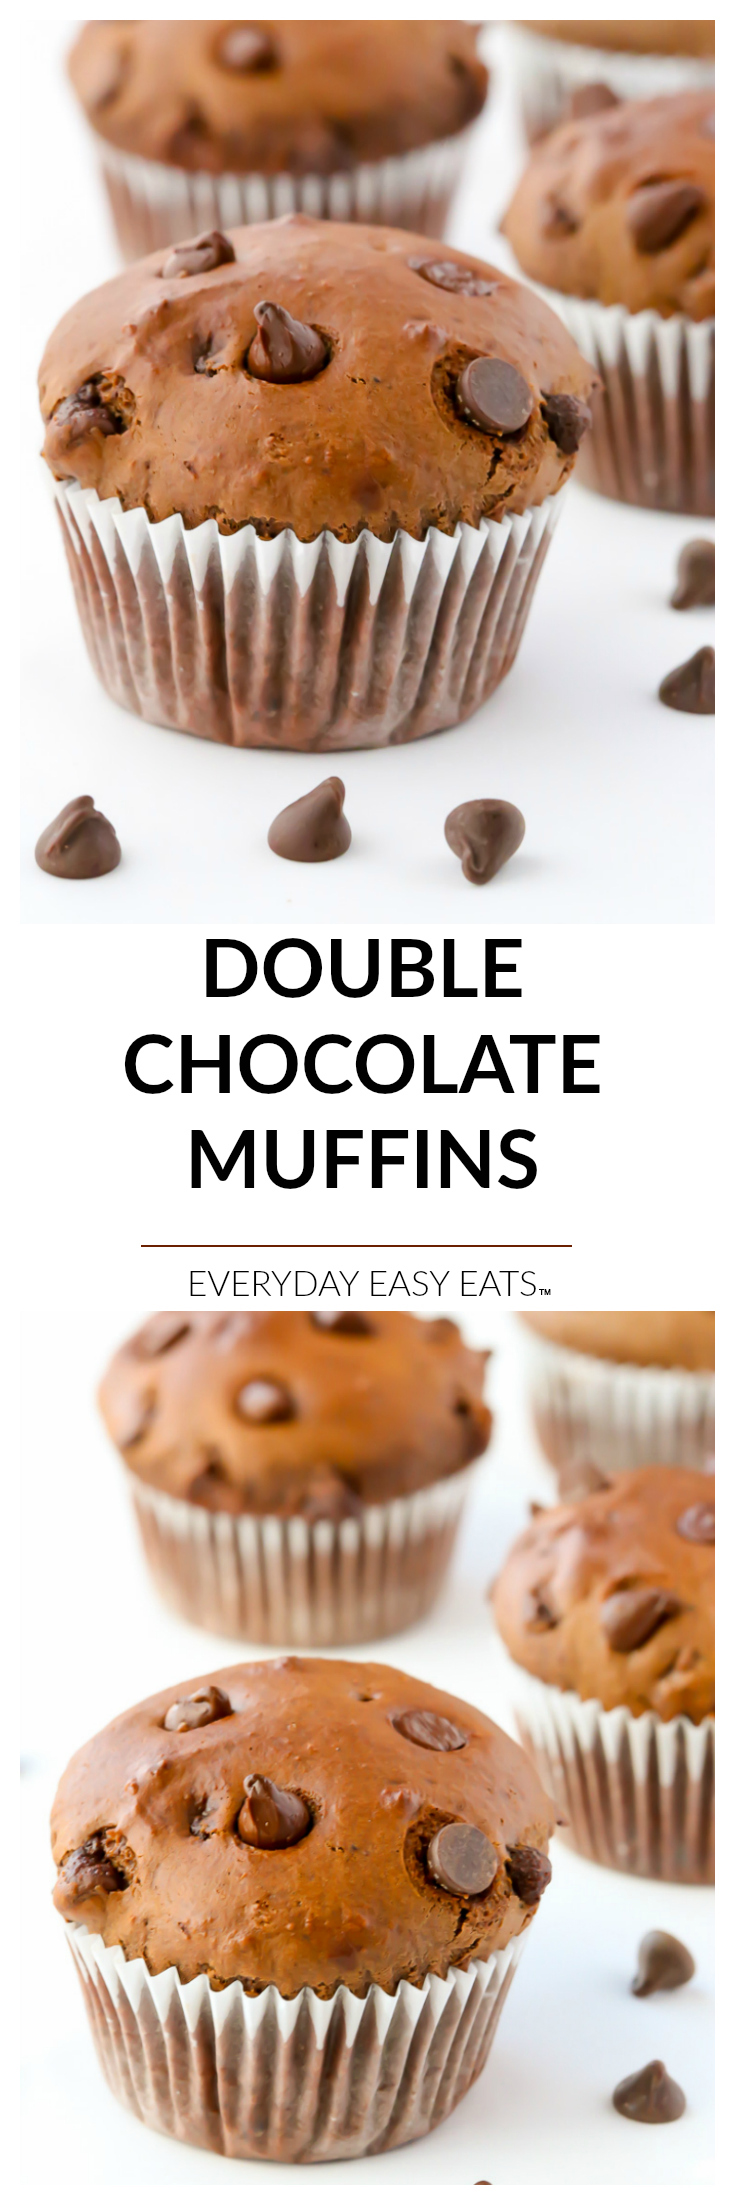 Easy Double Chocolate Muffins | Recipe at EverydayEasyEats.com